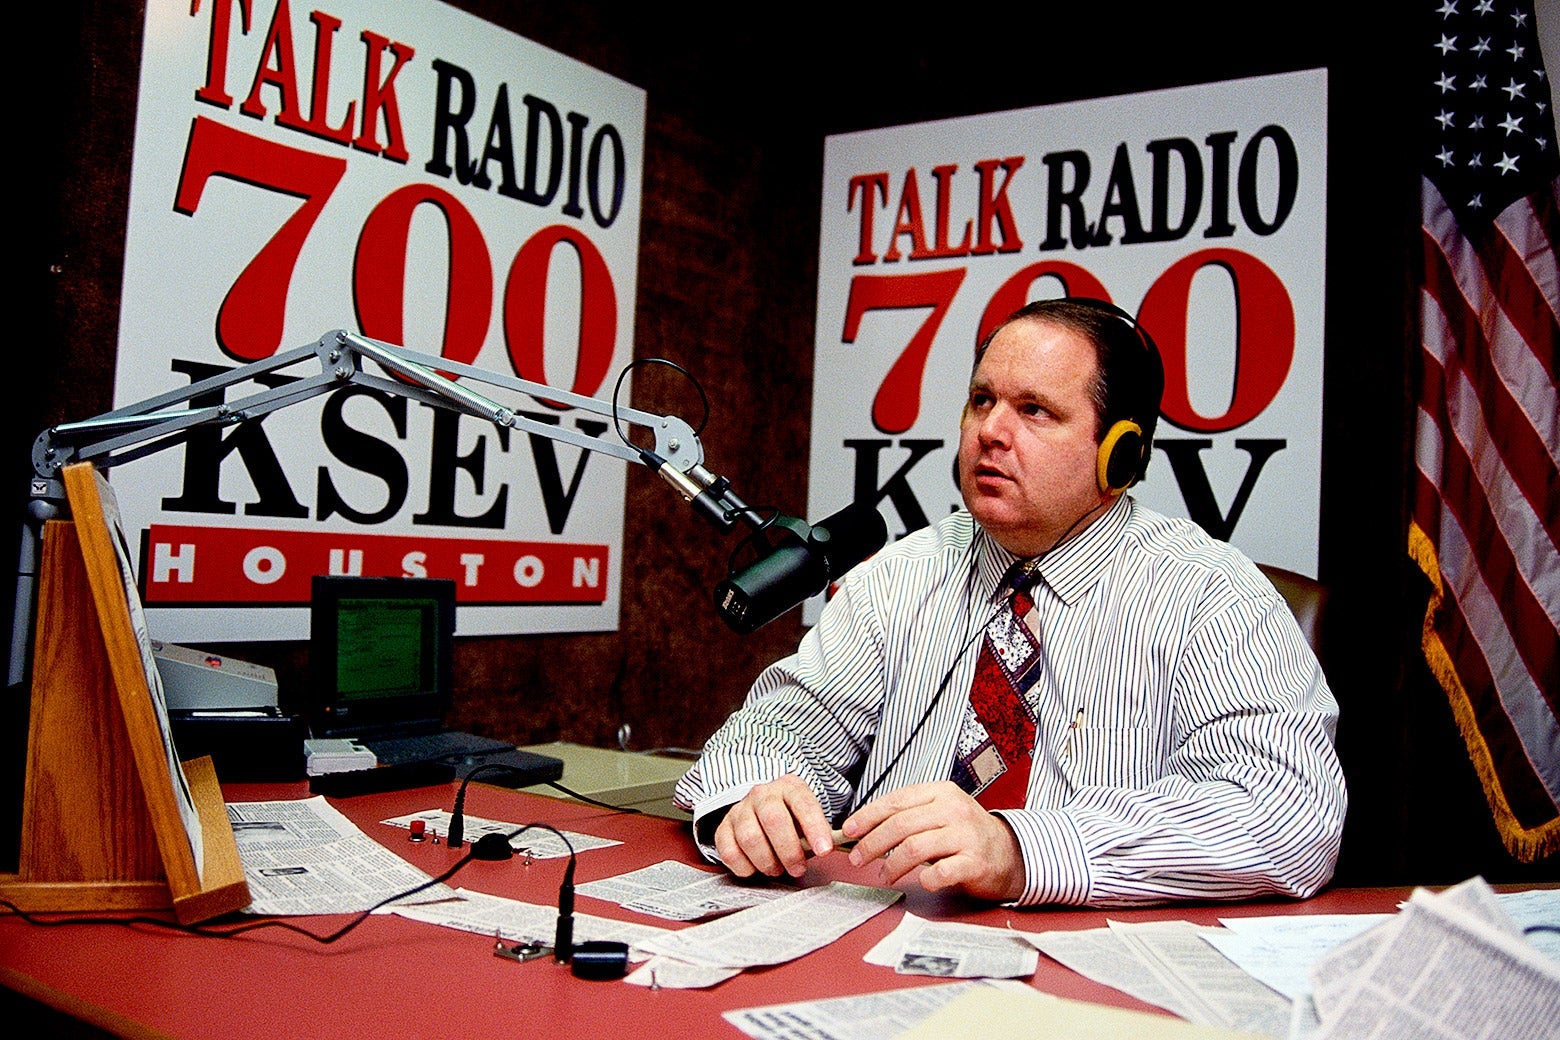 Rush Limbaugh wearing headphones, sitting in front of a mic at a desk covered in newspaper clippings